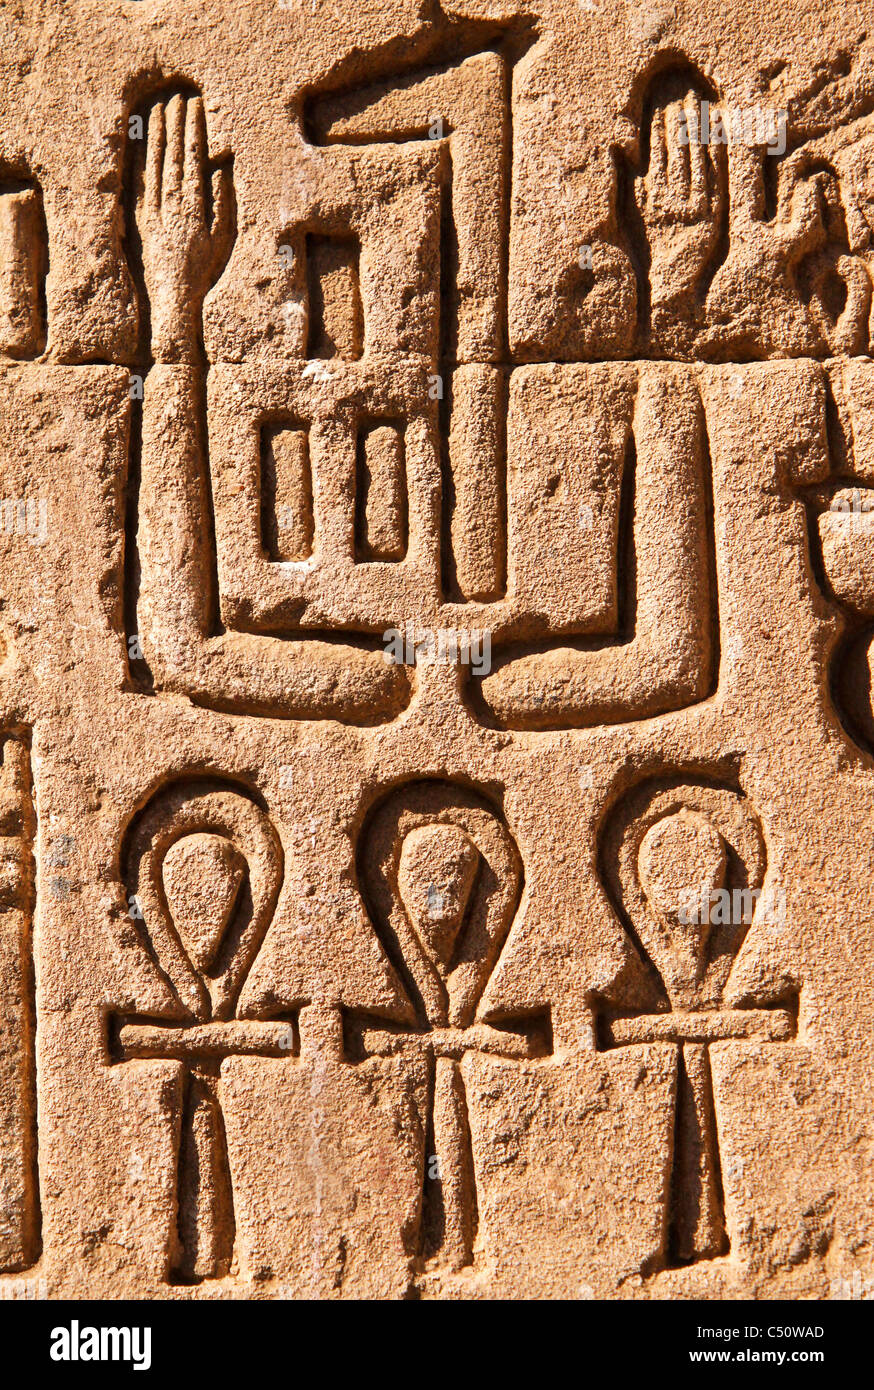 Temple of komombo south of Egypt Stock Photo